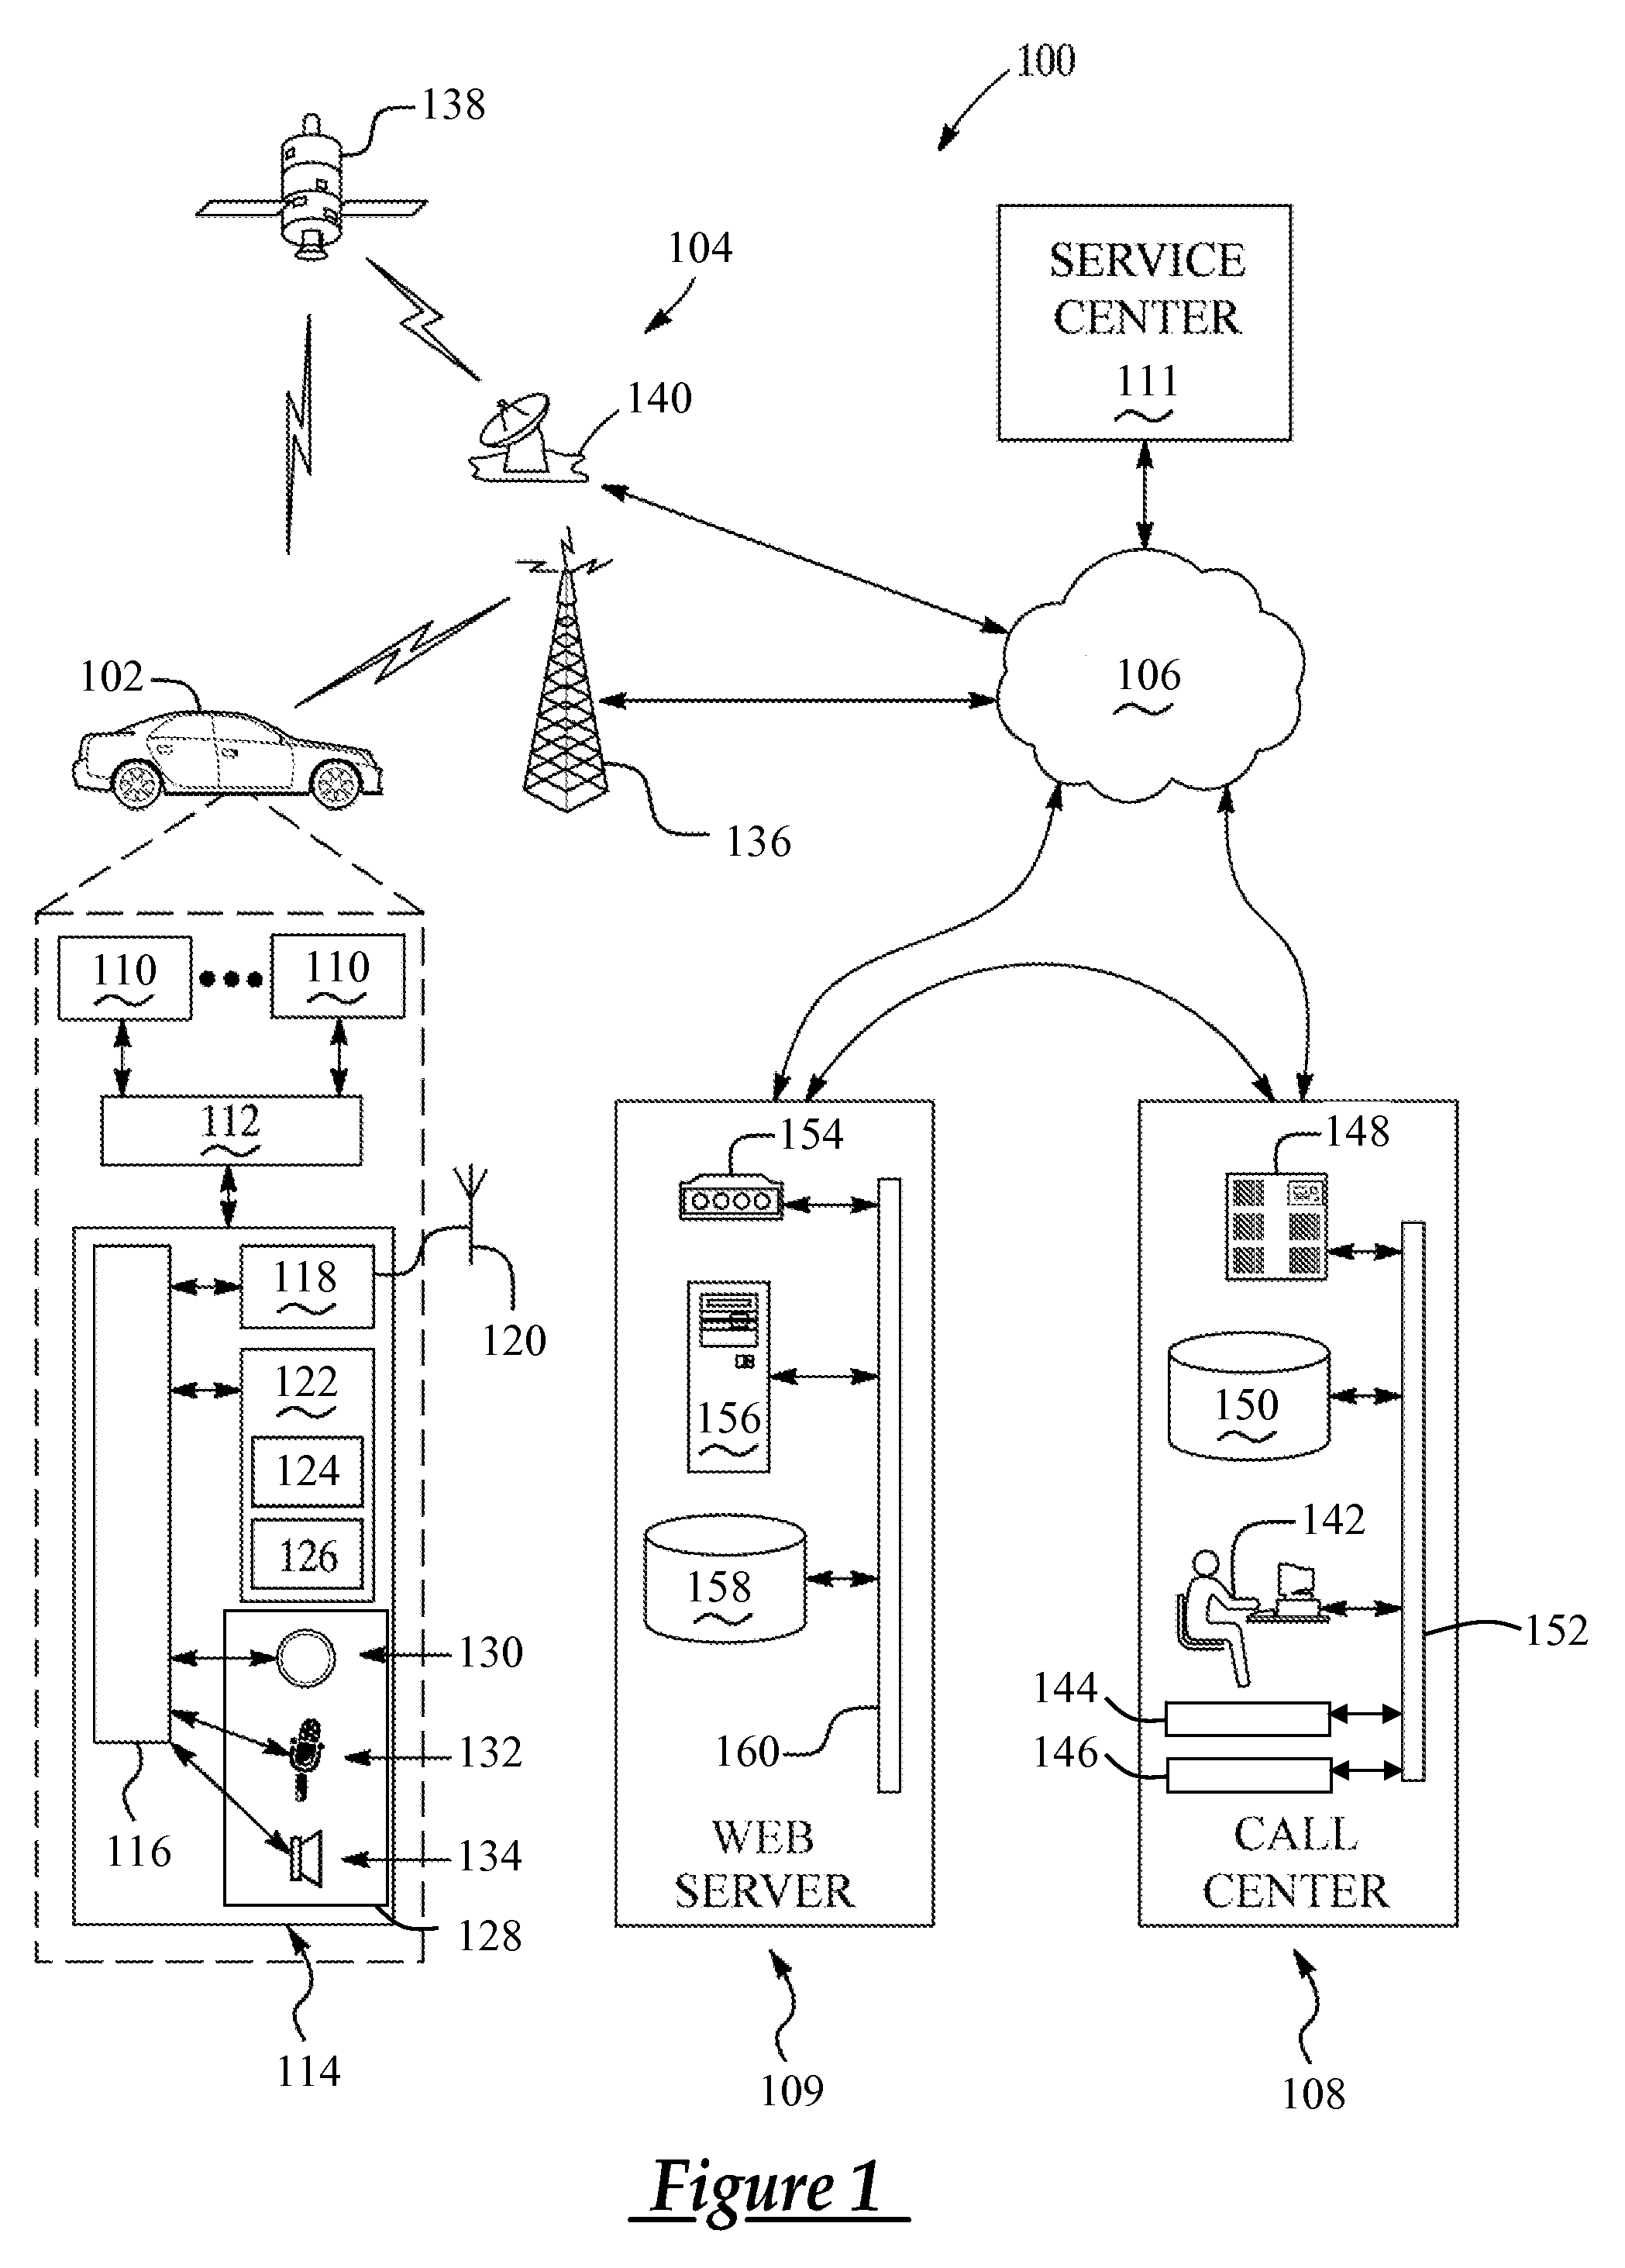 Automated speech recognition using normalized in-vehicle speech